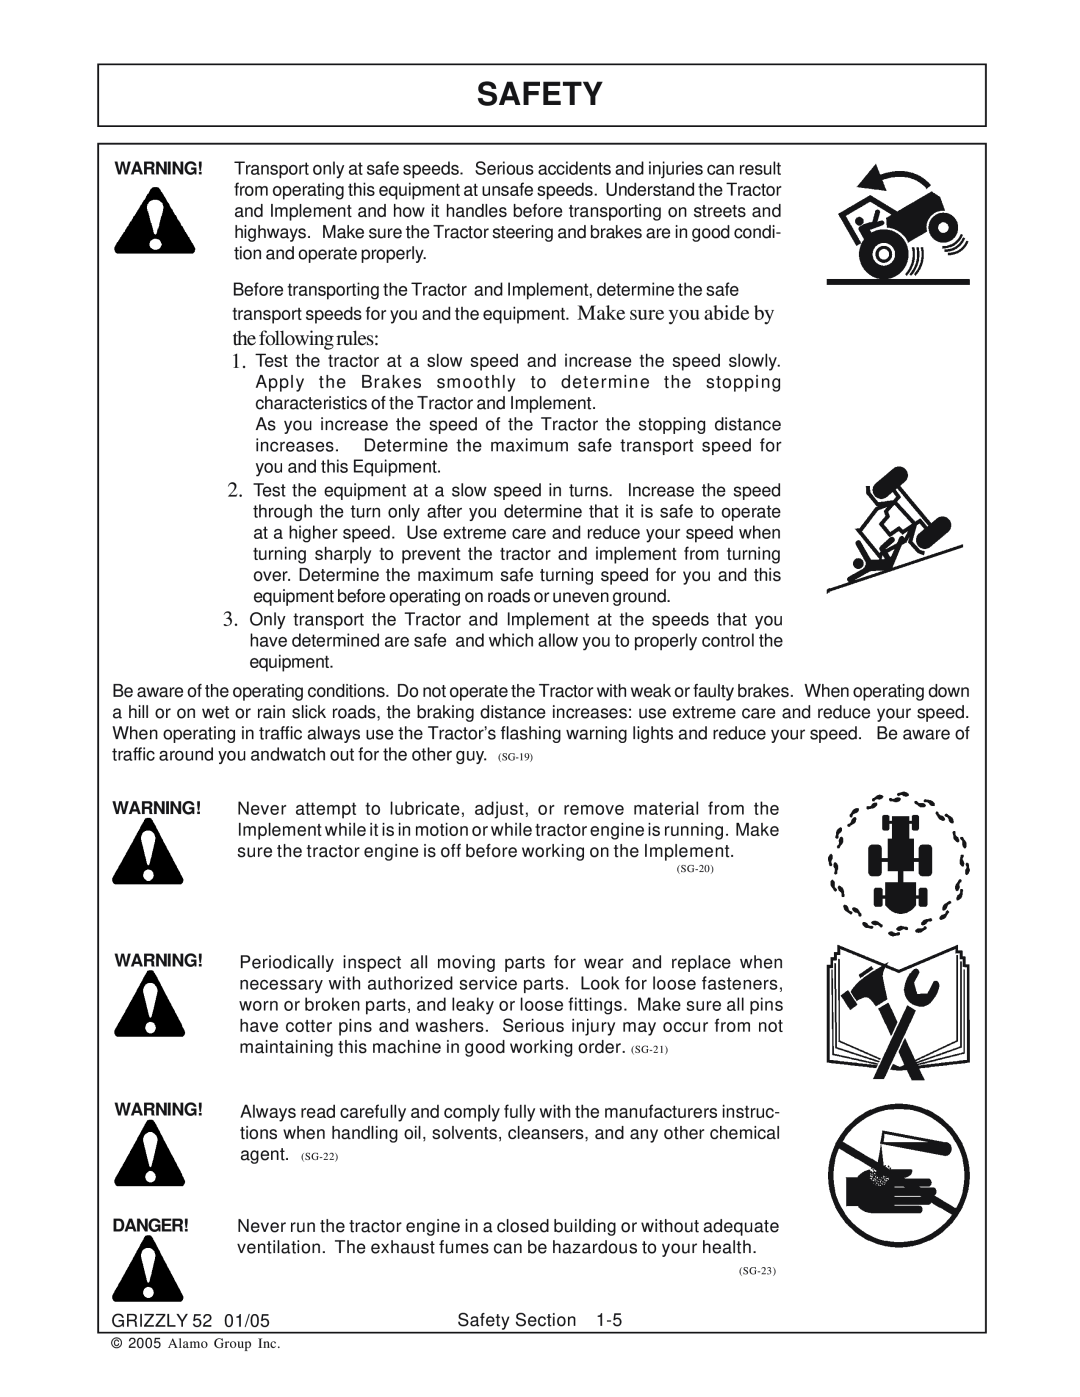 Grizzly 52 manual Safety, the following rules, Danger 